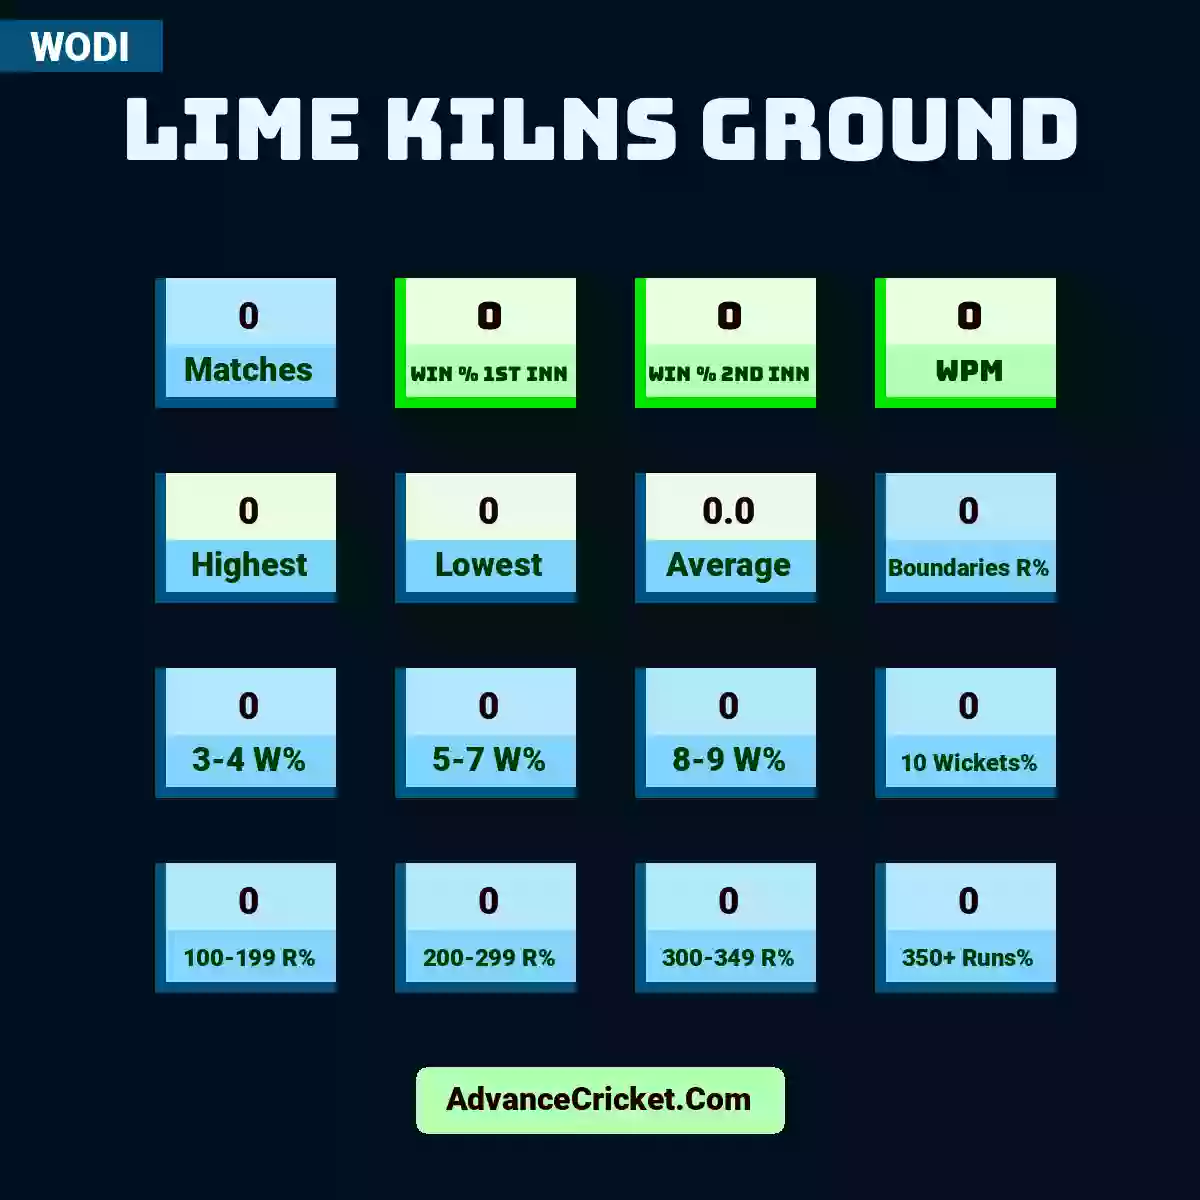 Image showing Lime Kilns Ground with Matches: 0, Win % 1st Inn: 0, Win % 2nd Inn: 0, WPM: 0, Highest: 0, Lowest: 0, Average: 0.0, Boundaries R%: 0, 3-4 W%: 0, 5-7 W%: 0, 8-9 W%: 0, 10 Wickets%: 0, 100-199 R%: 0, 200-299 R%: 0, 300-349 R%: 0, 350+ Runs%: 0.